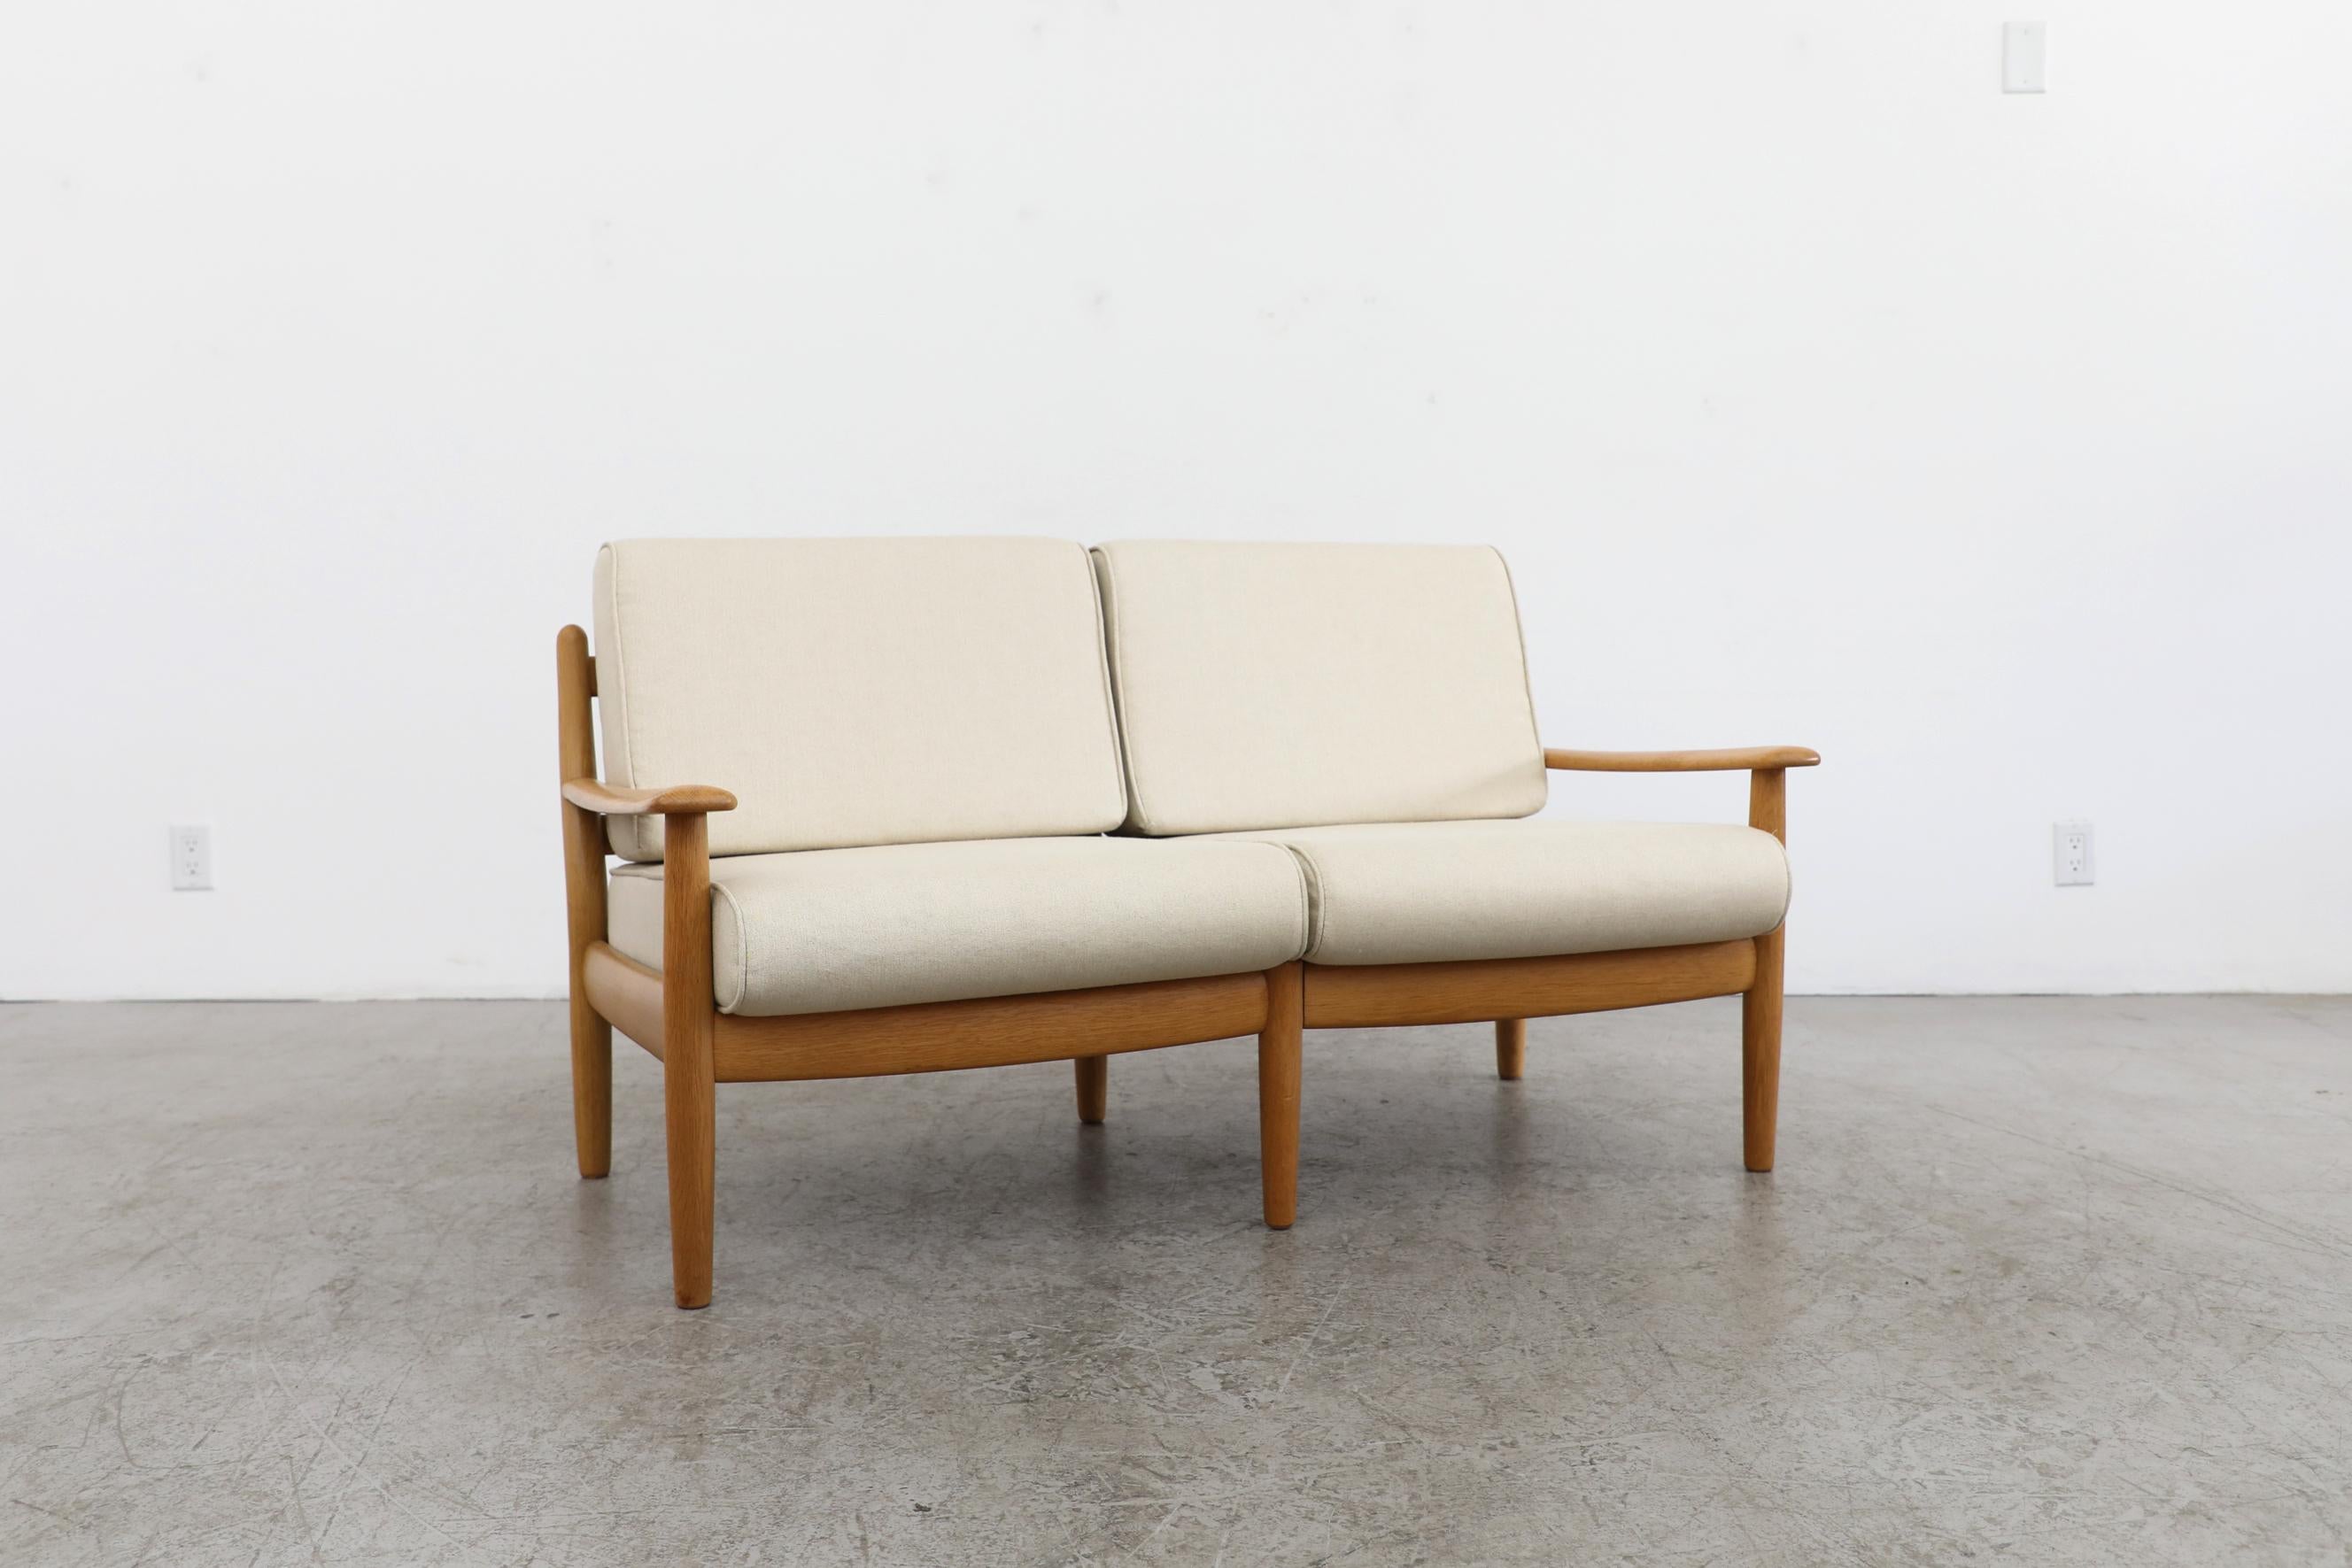 Mid-20th Century Wilhelm Knoll Oak Loveseat with Rounded Edges & Cream Cushions, Germany, 1960's For Sale